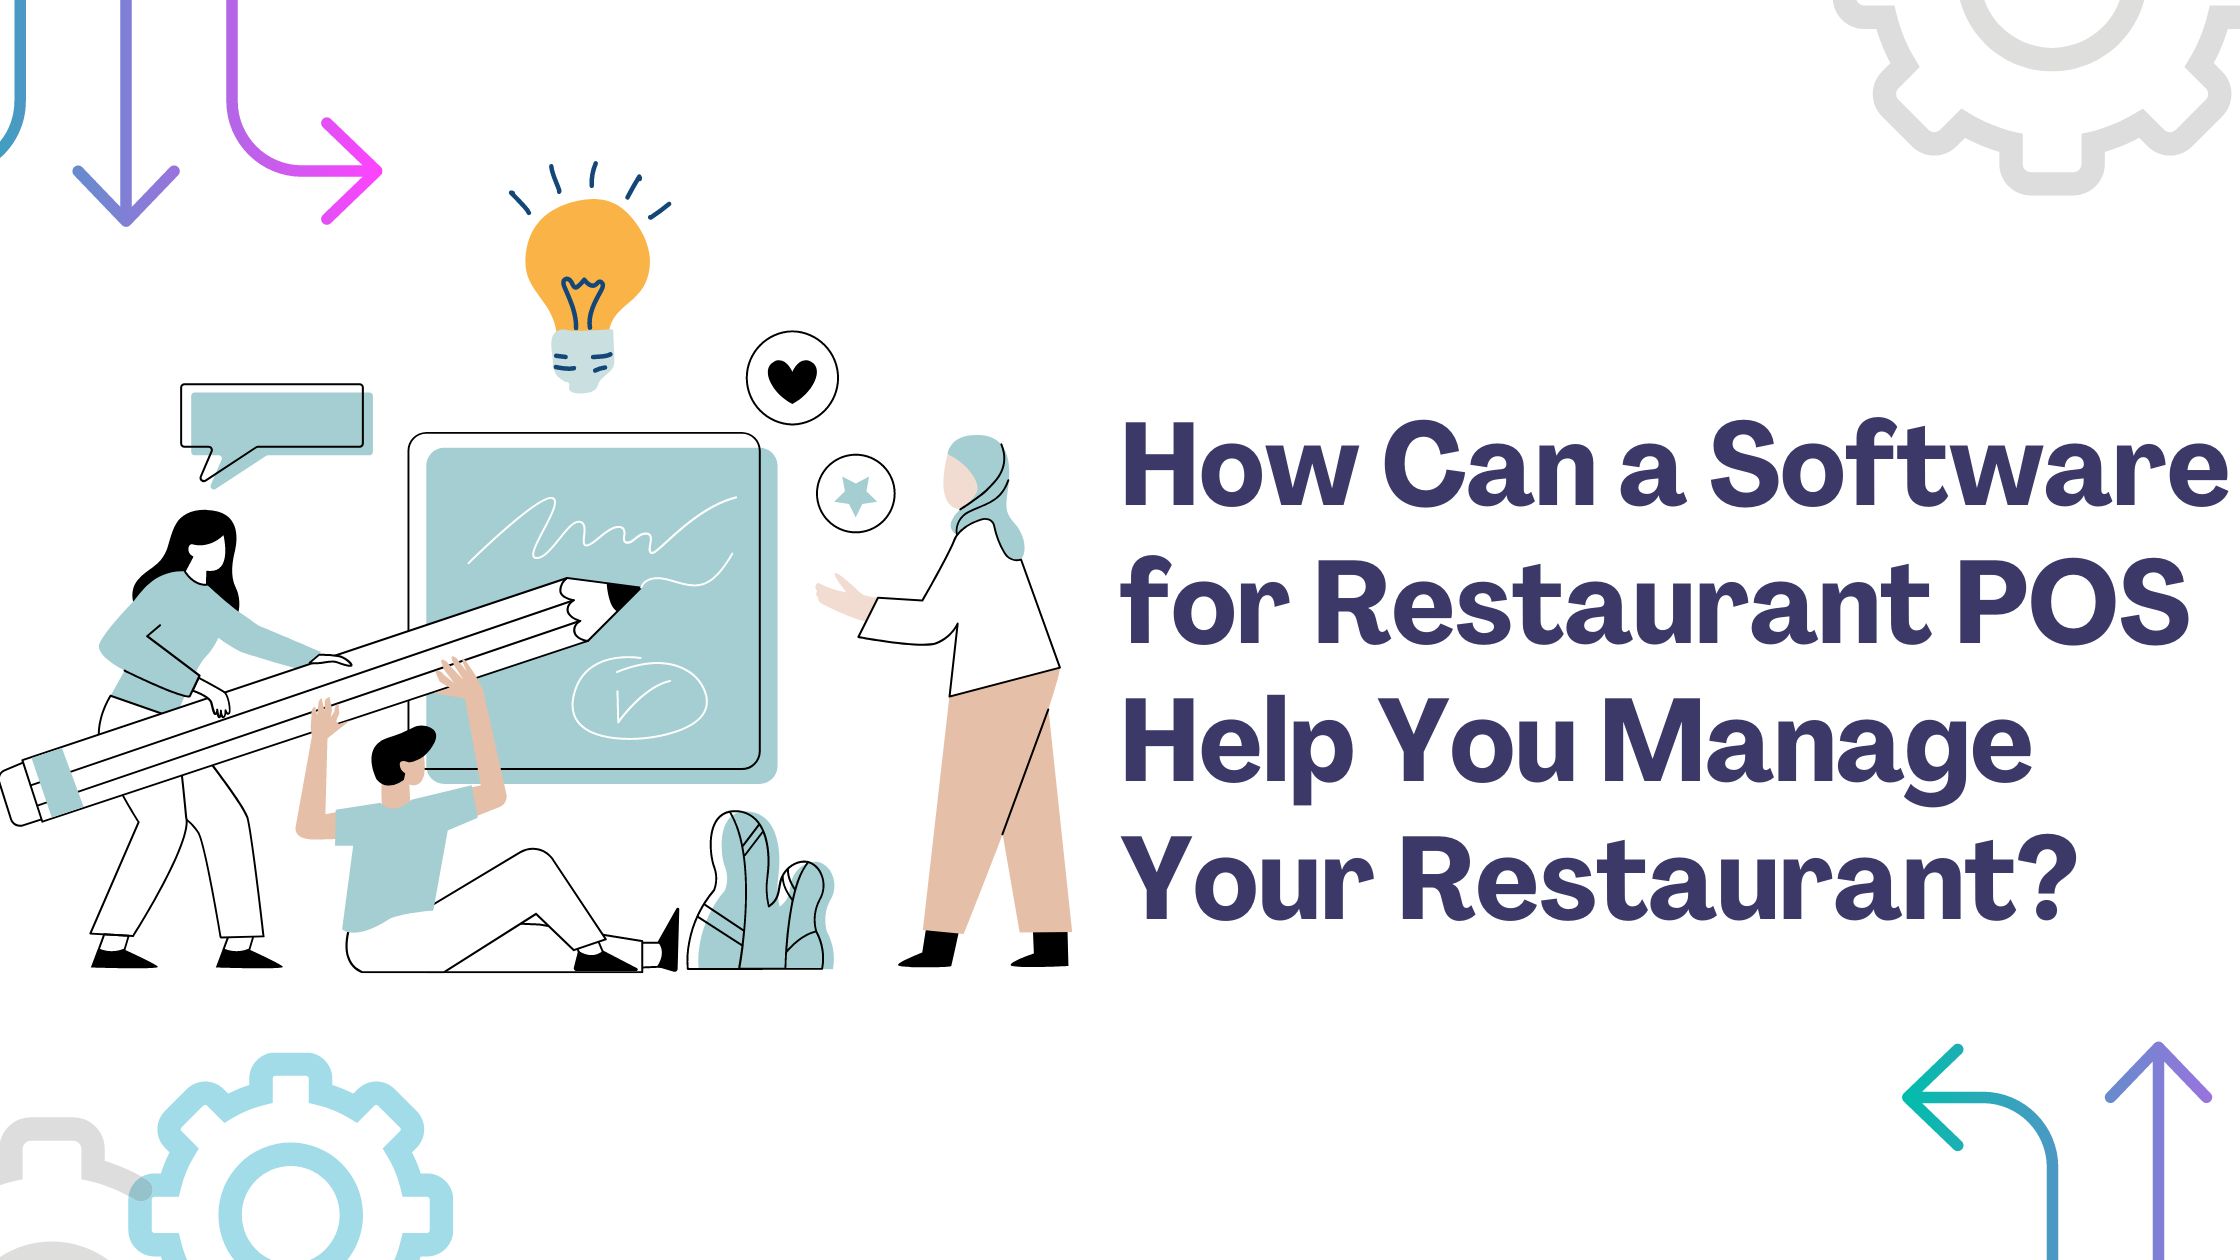 How Can a Software for Restaurant POS Help You Manage Your Restaurant?